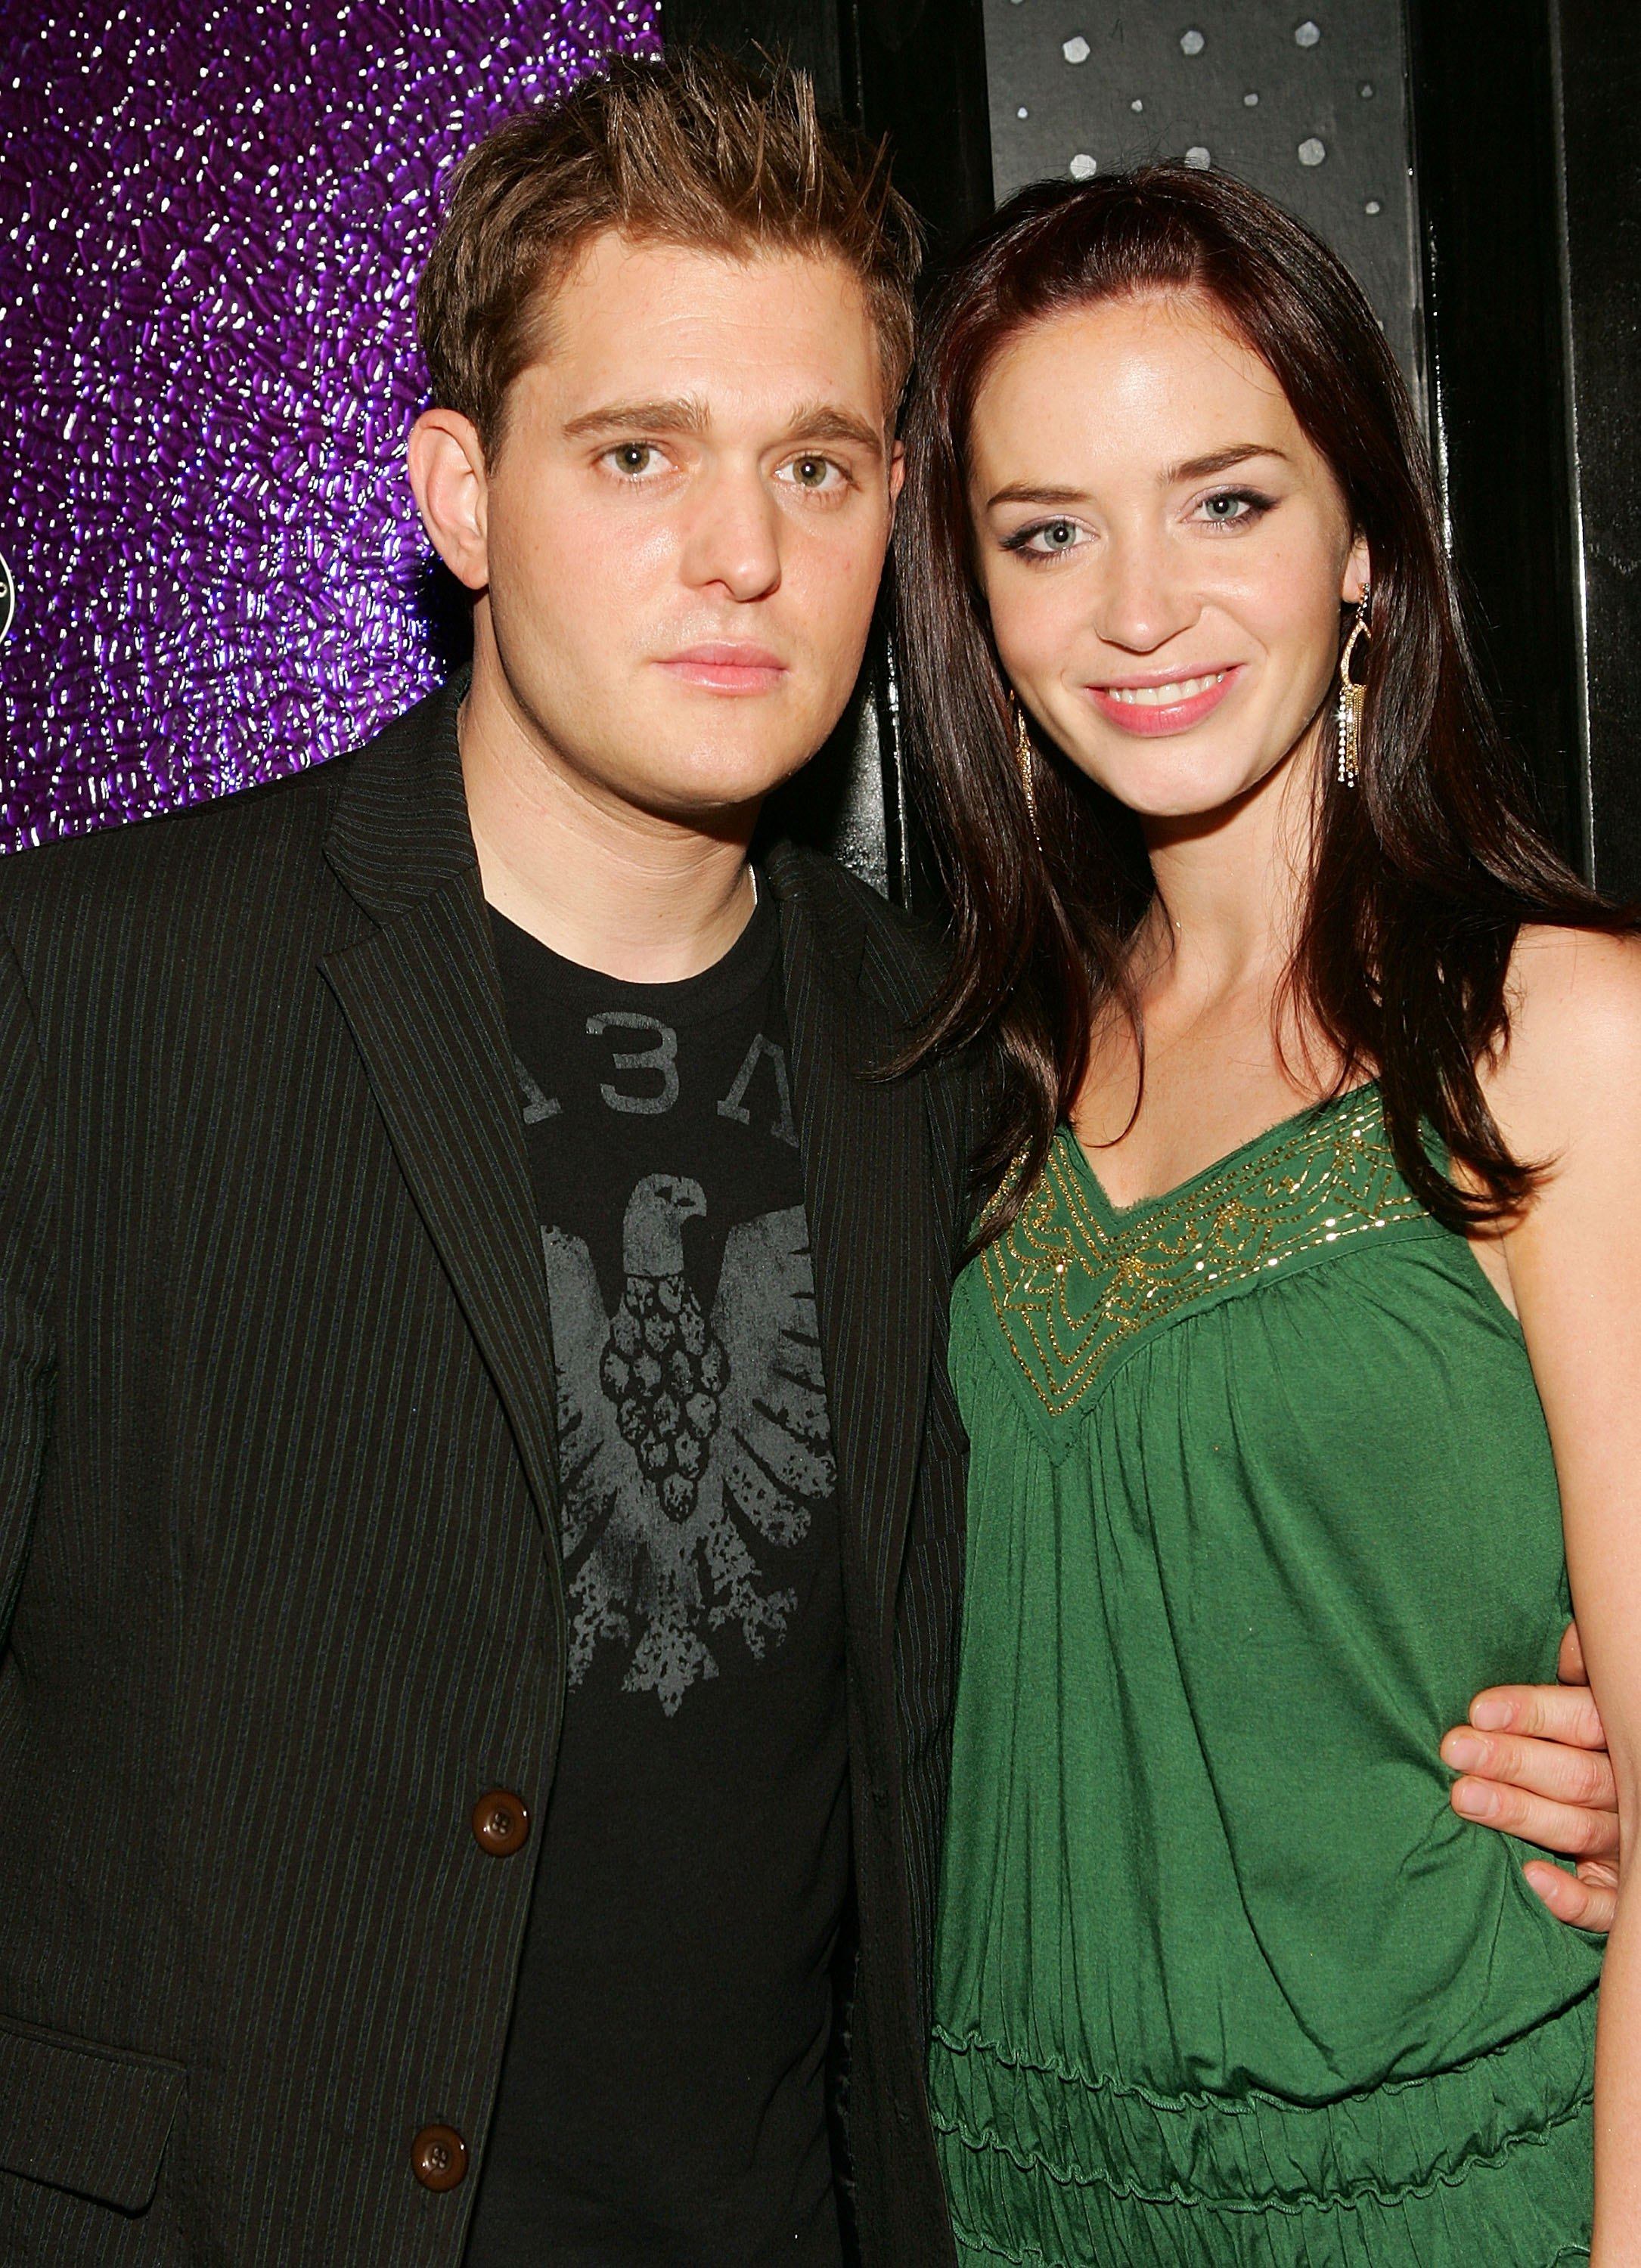 Singer Michael Buble and actress Emily Blunt attend "The Devil Wears Prada" premiere after party at 230 Fifth June 19, 2006 in New York City. 